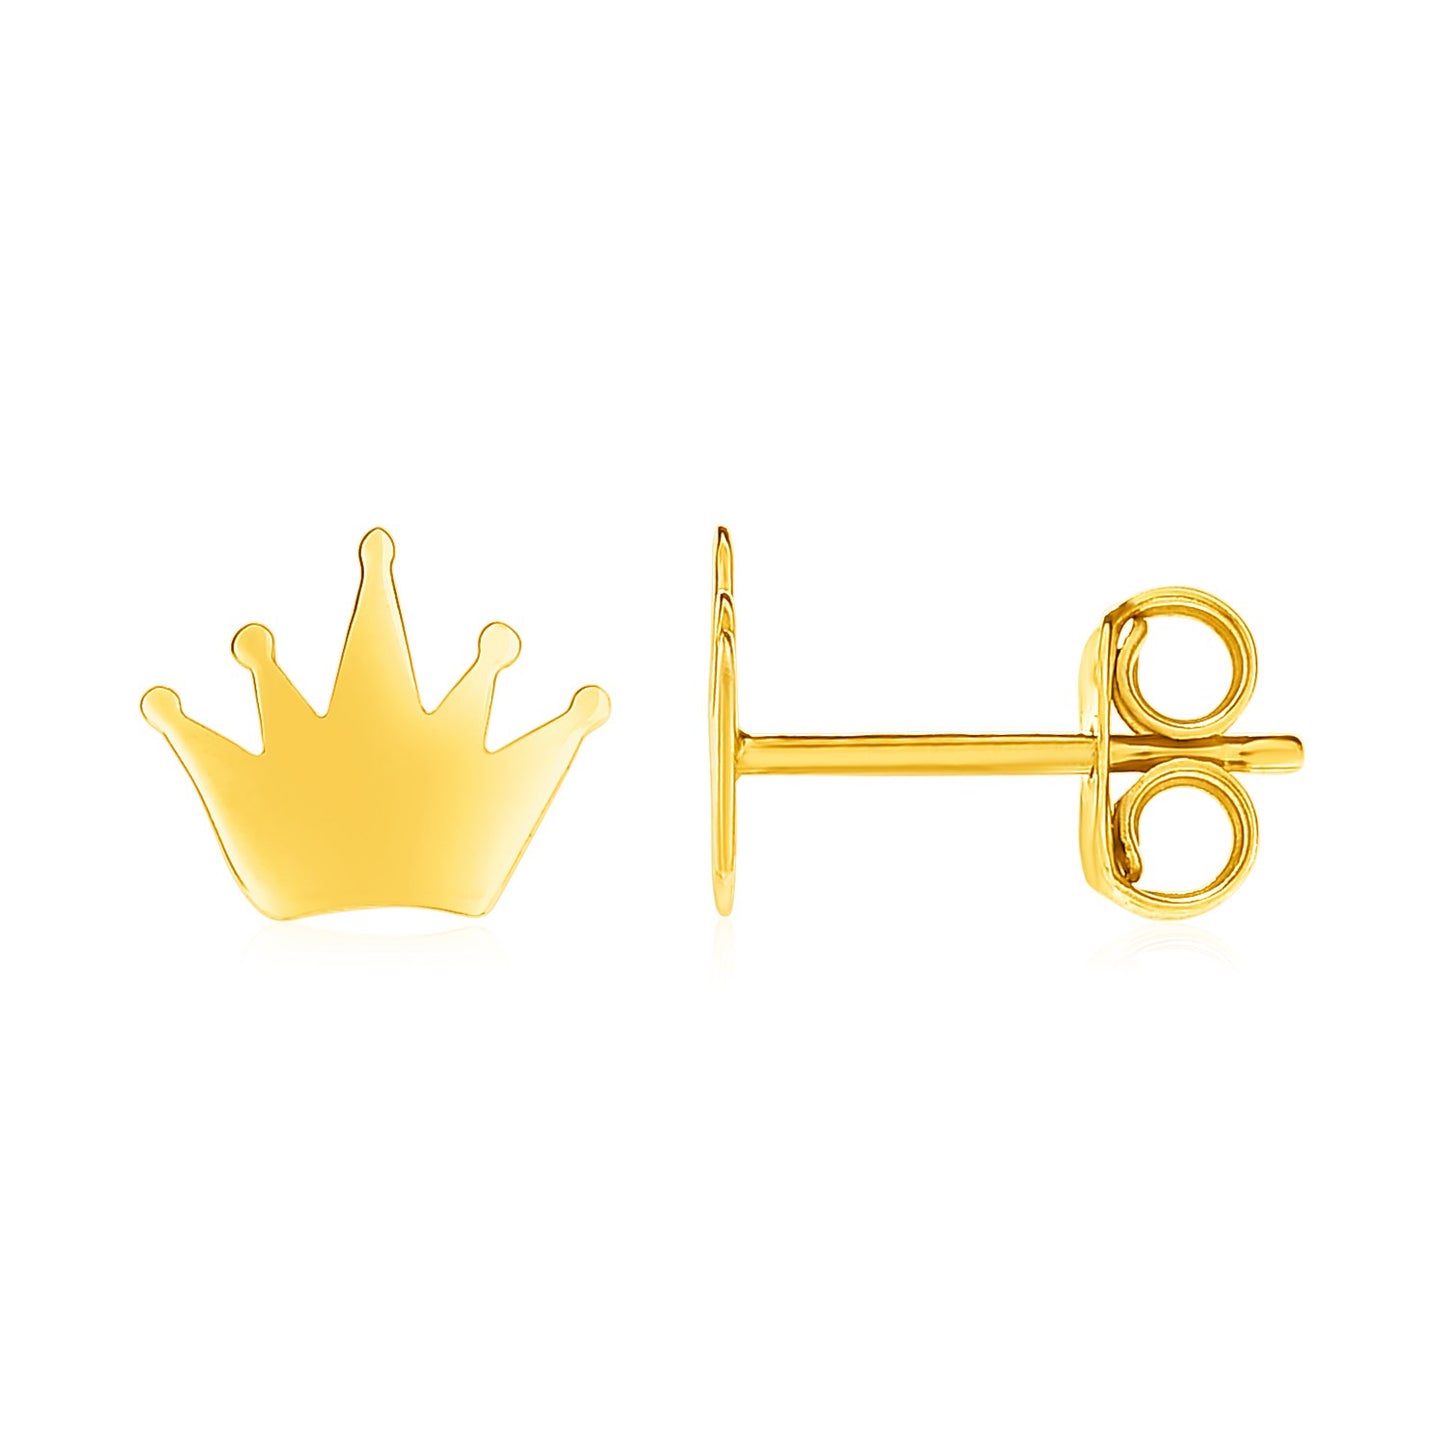 14k Yellow Gold Post Earrings with Crowns